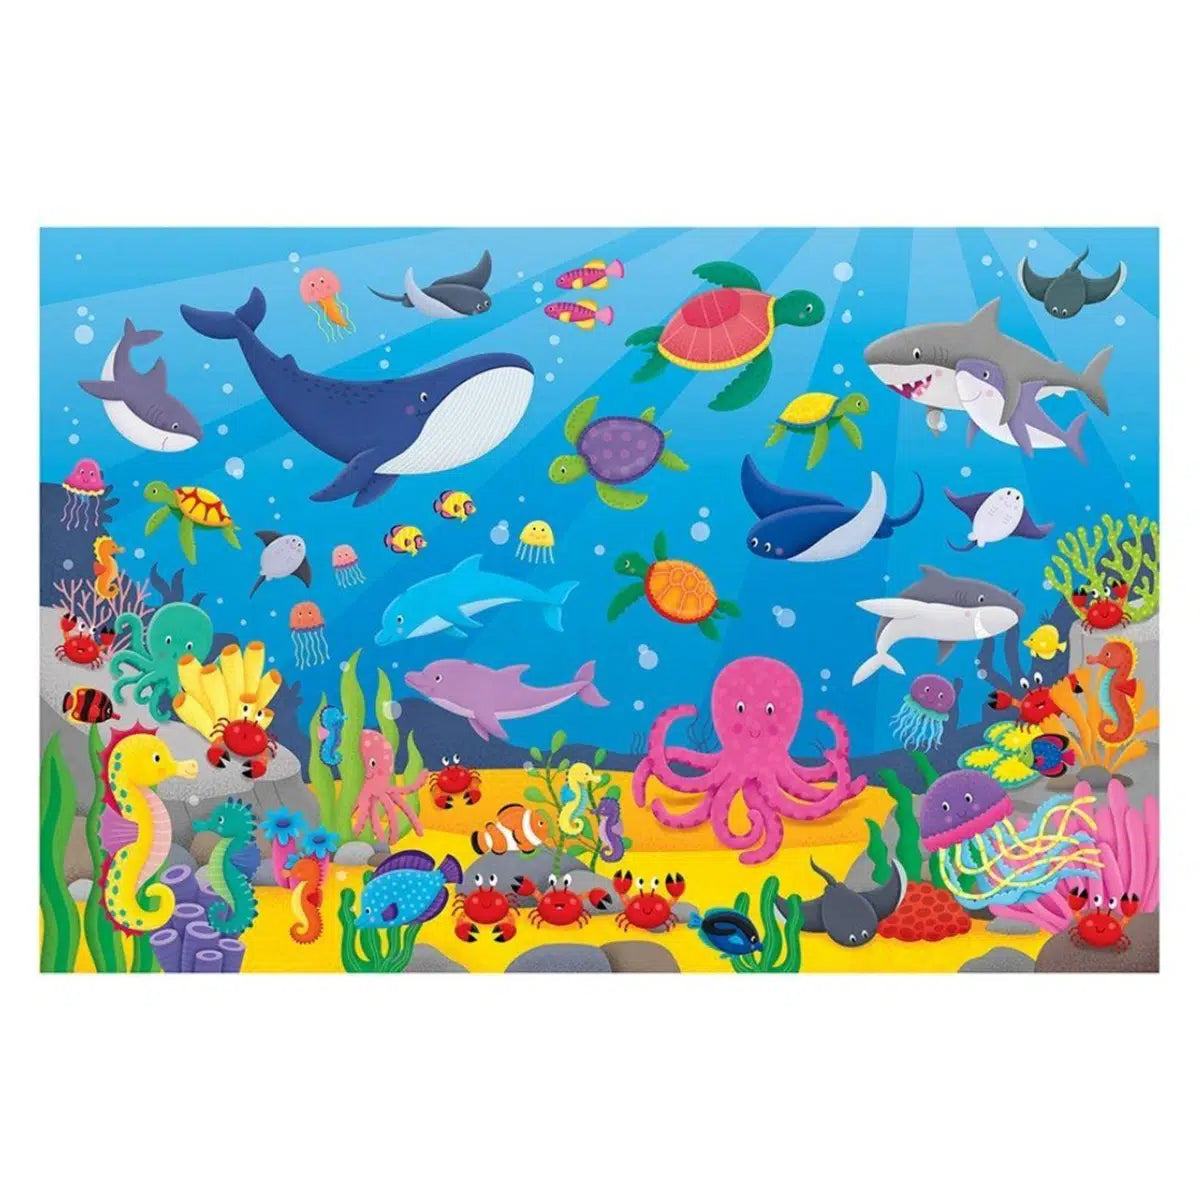 Galt Giant Floor Puzzles: Counting Creatures